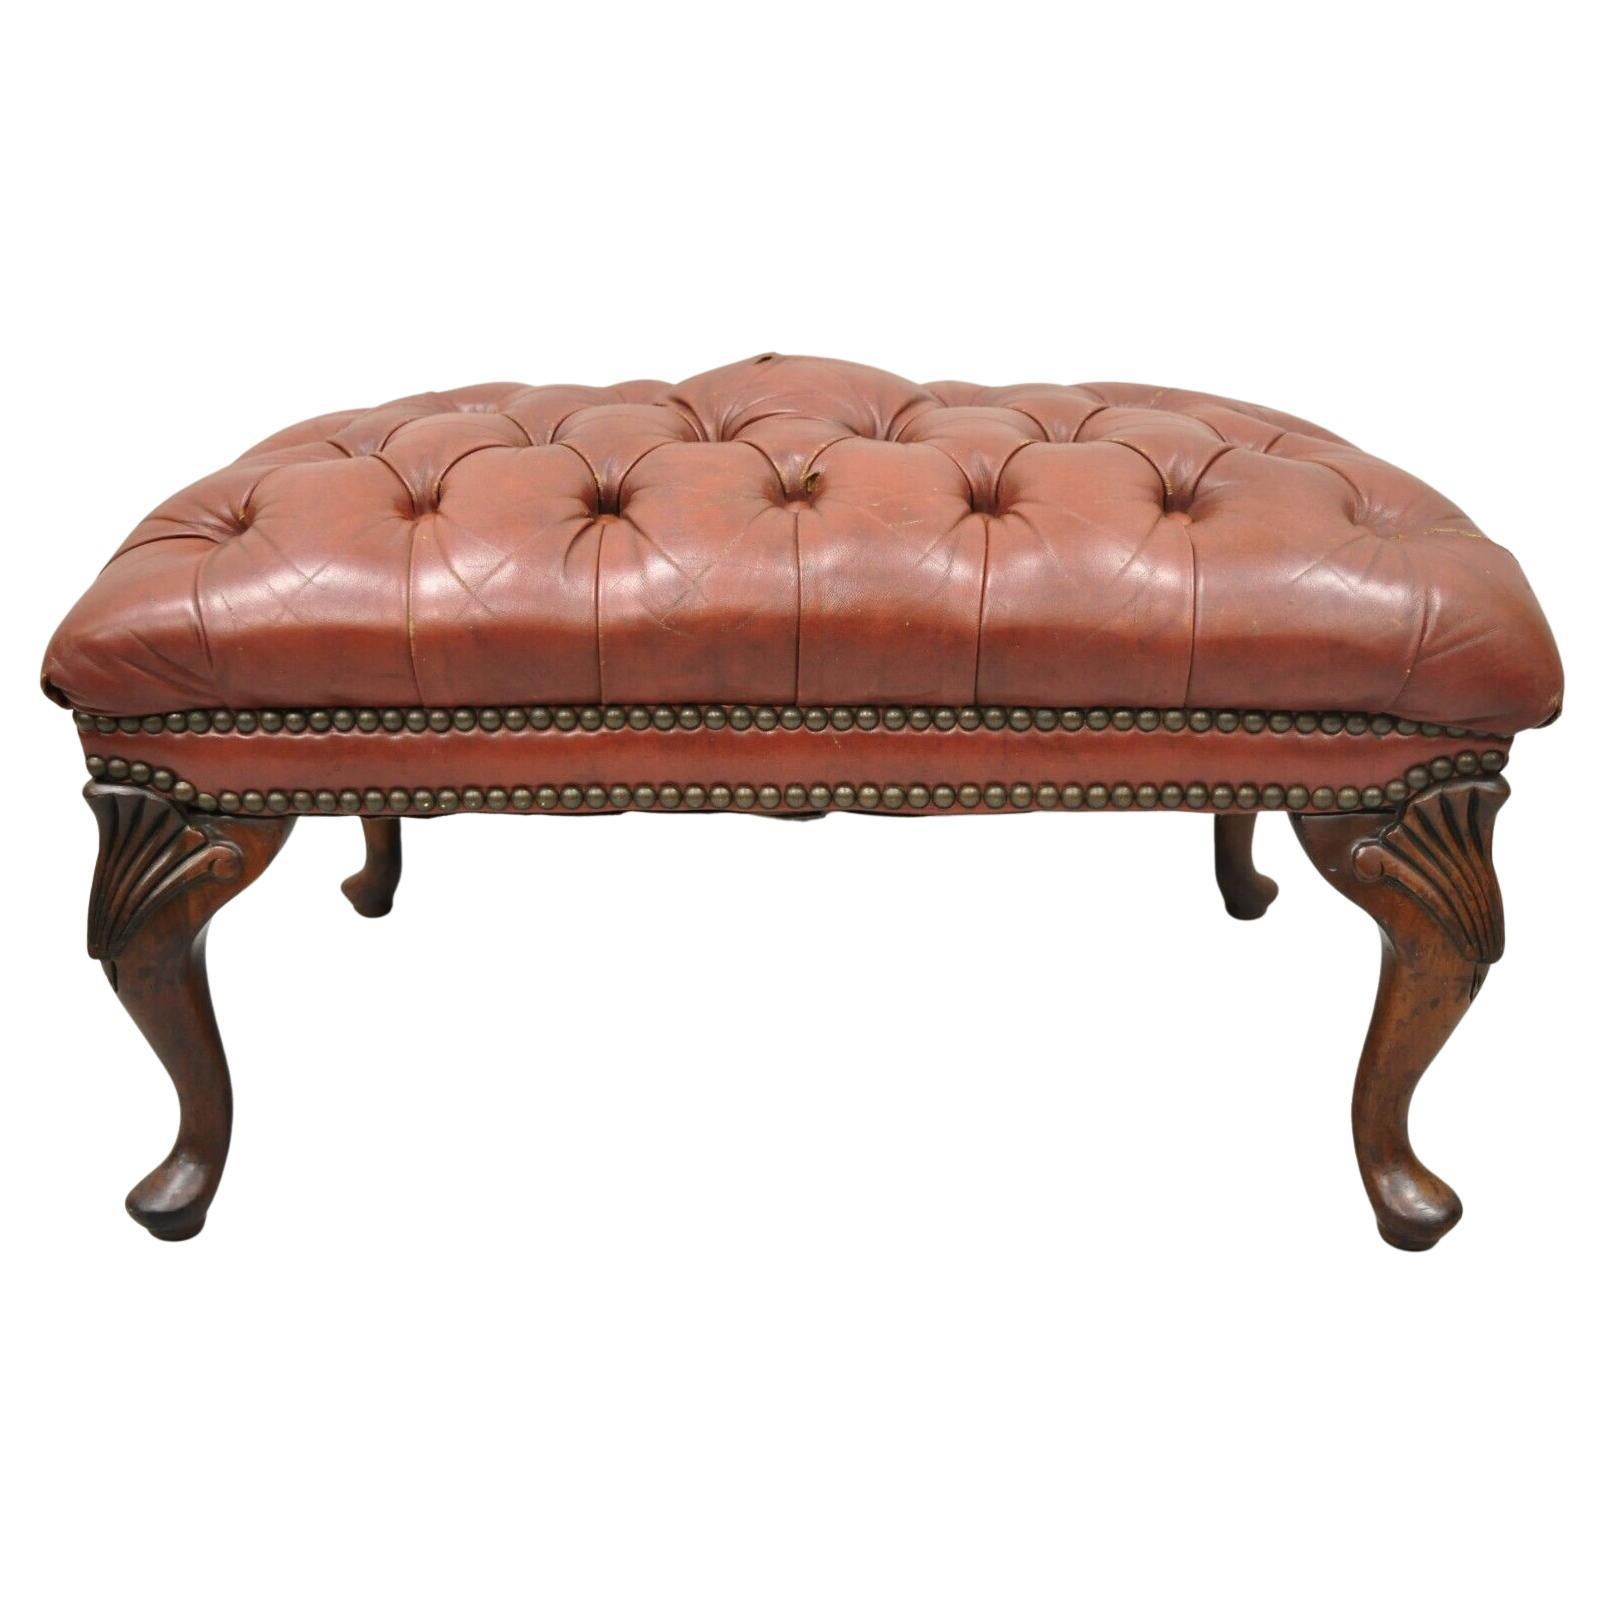 Vtg Brown Leather English Chesterfield Queen Anne Style Tufted Ottoman Footstool For Sale